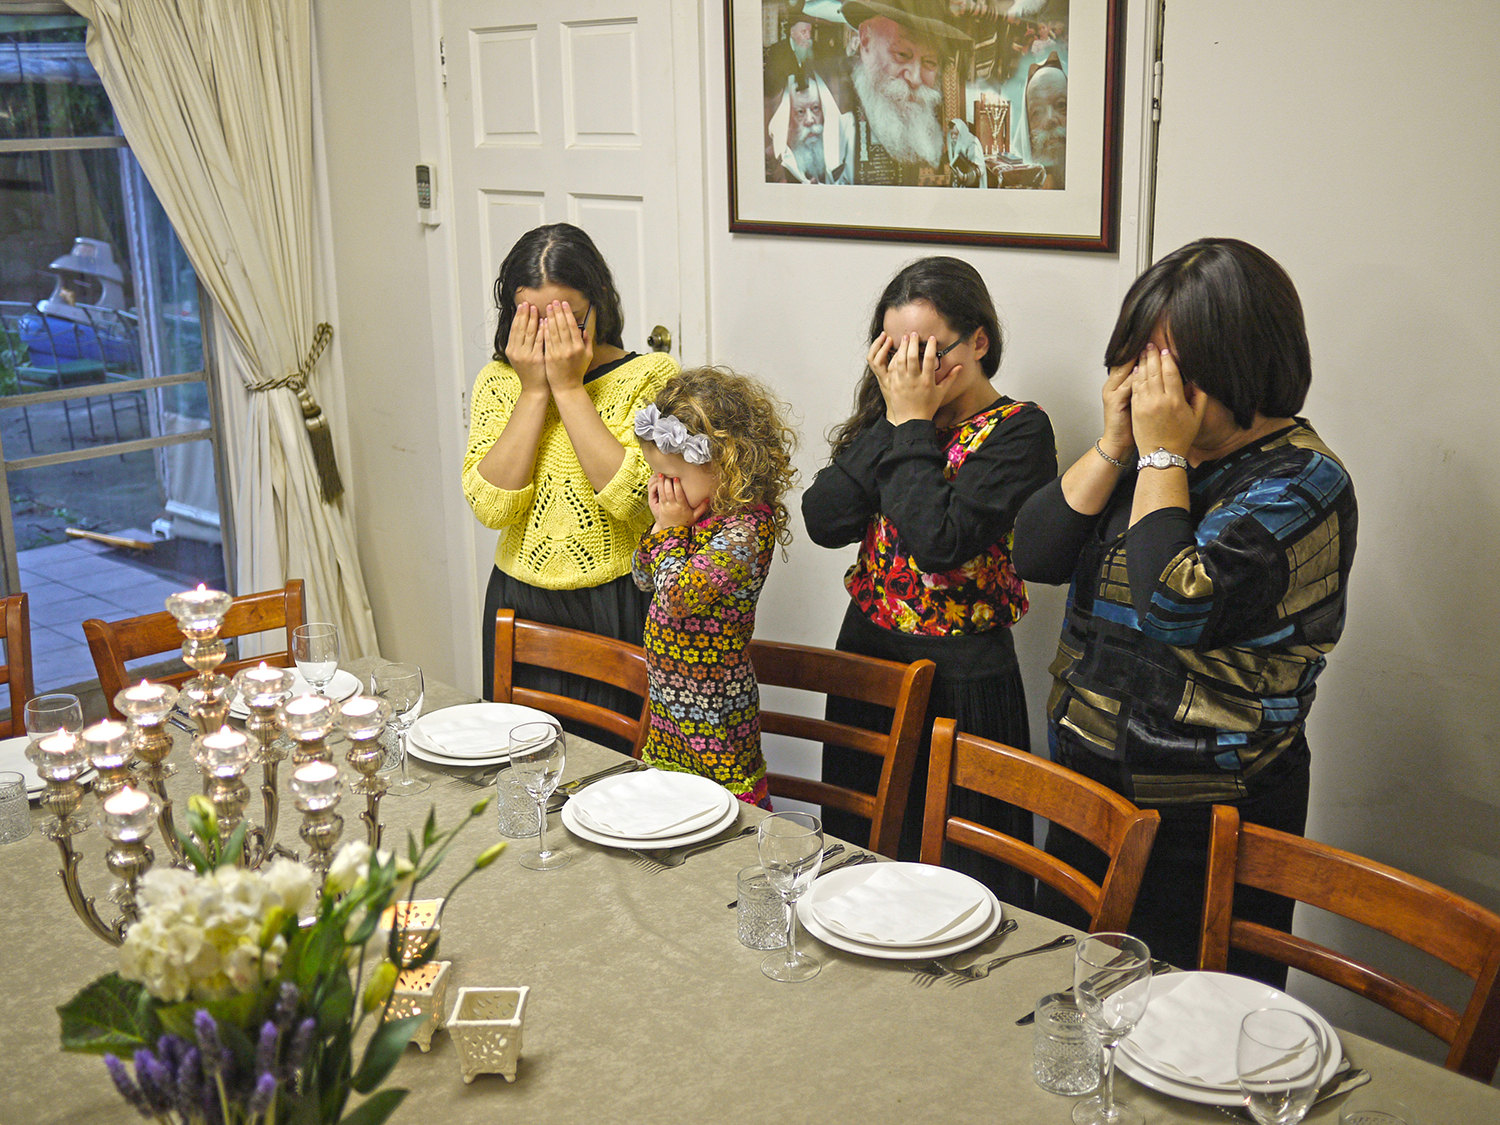 Three girls and a woman stand in front of settings at a dining table with their hands covering their eyes.